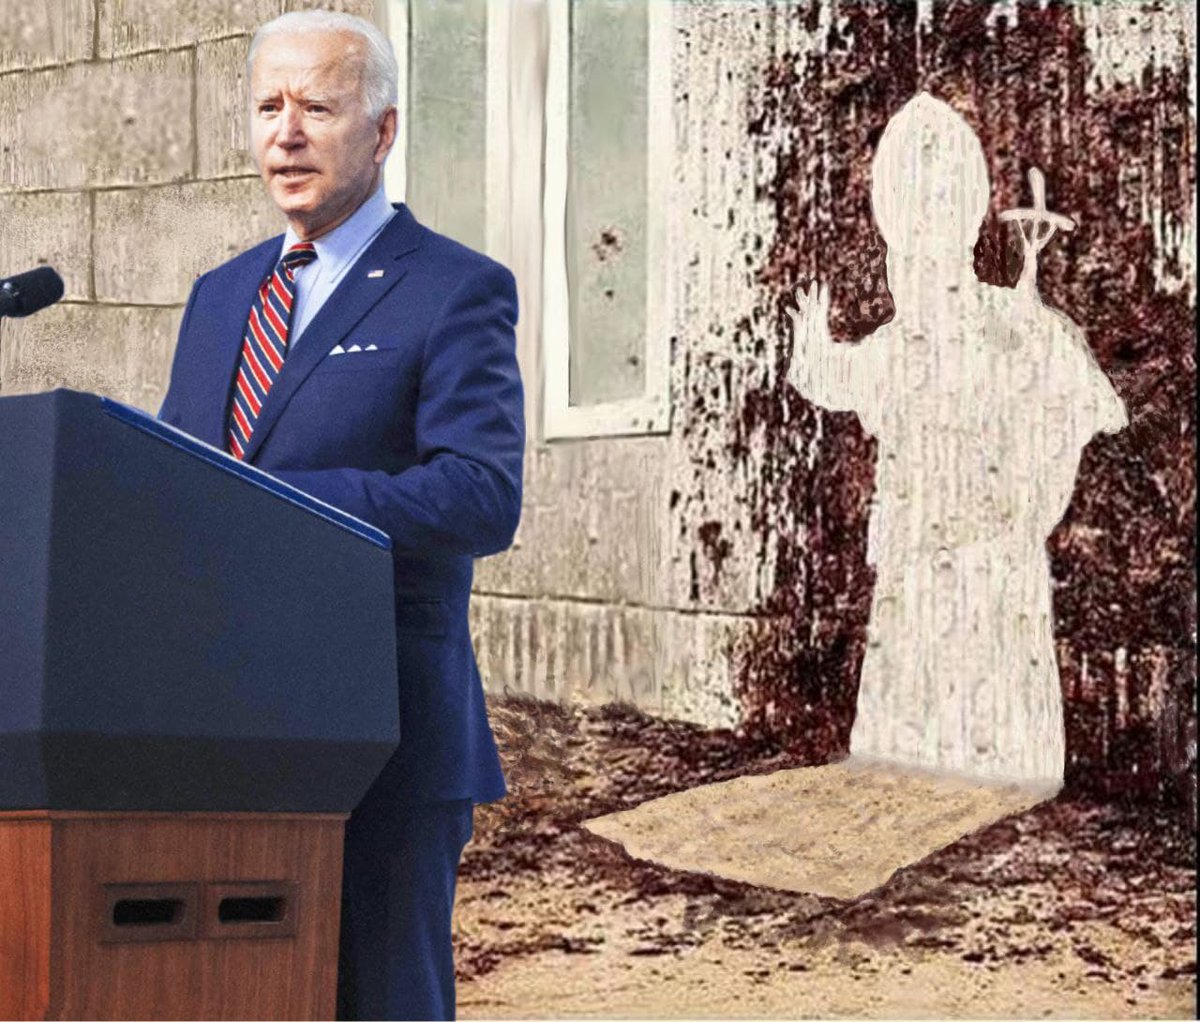 @StephaniePille7 #Biden shit his pants at the Vatican.